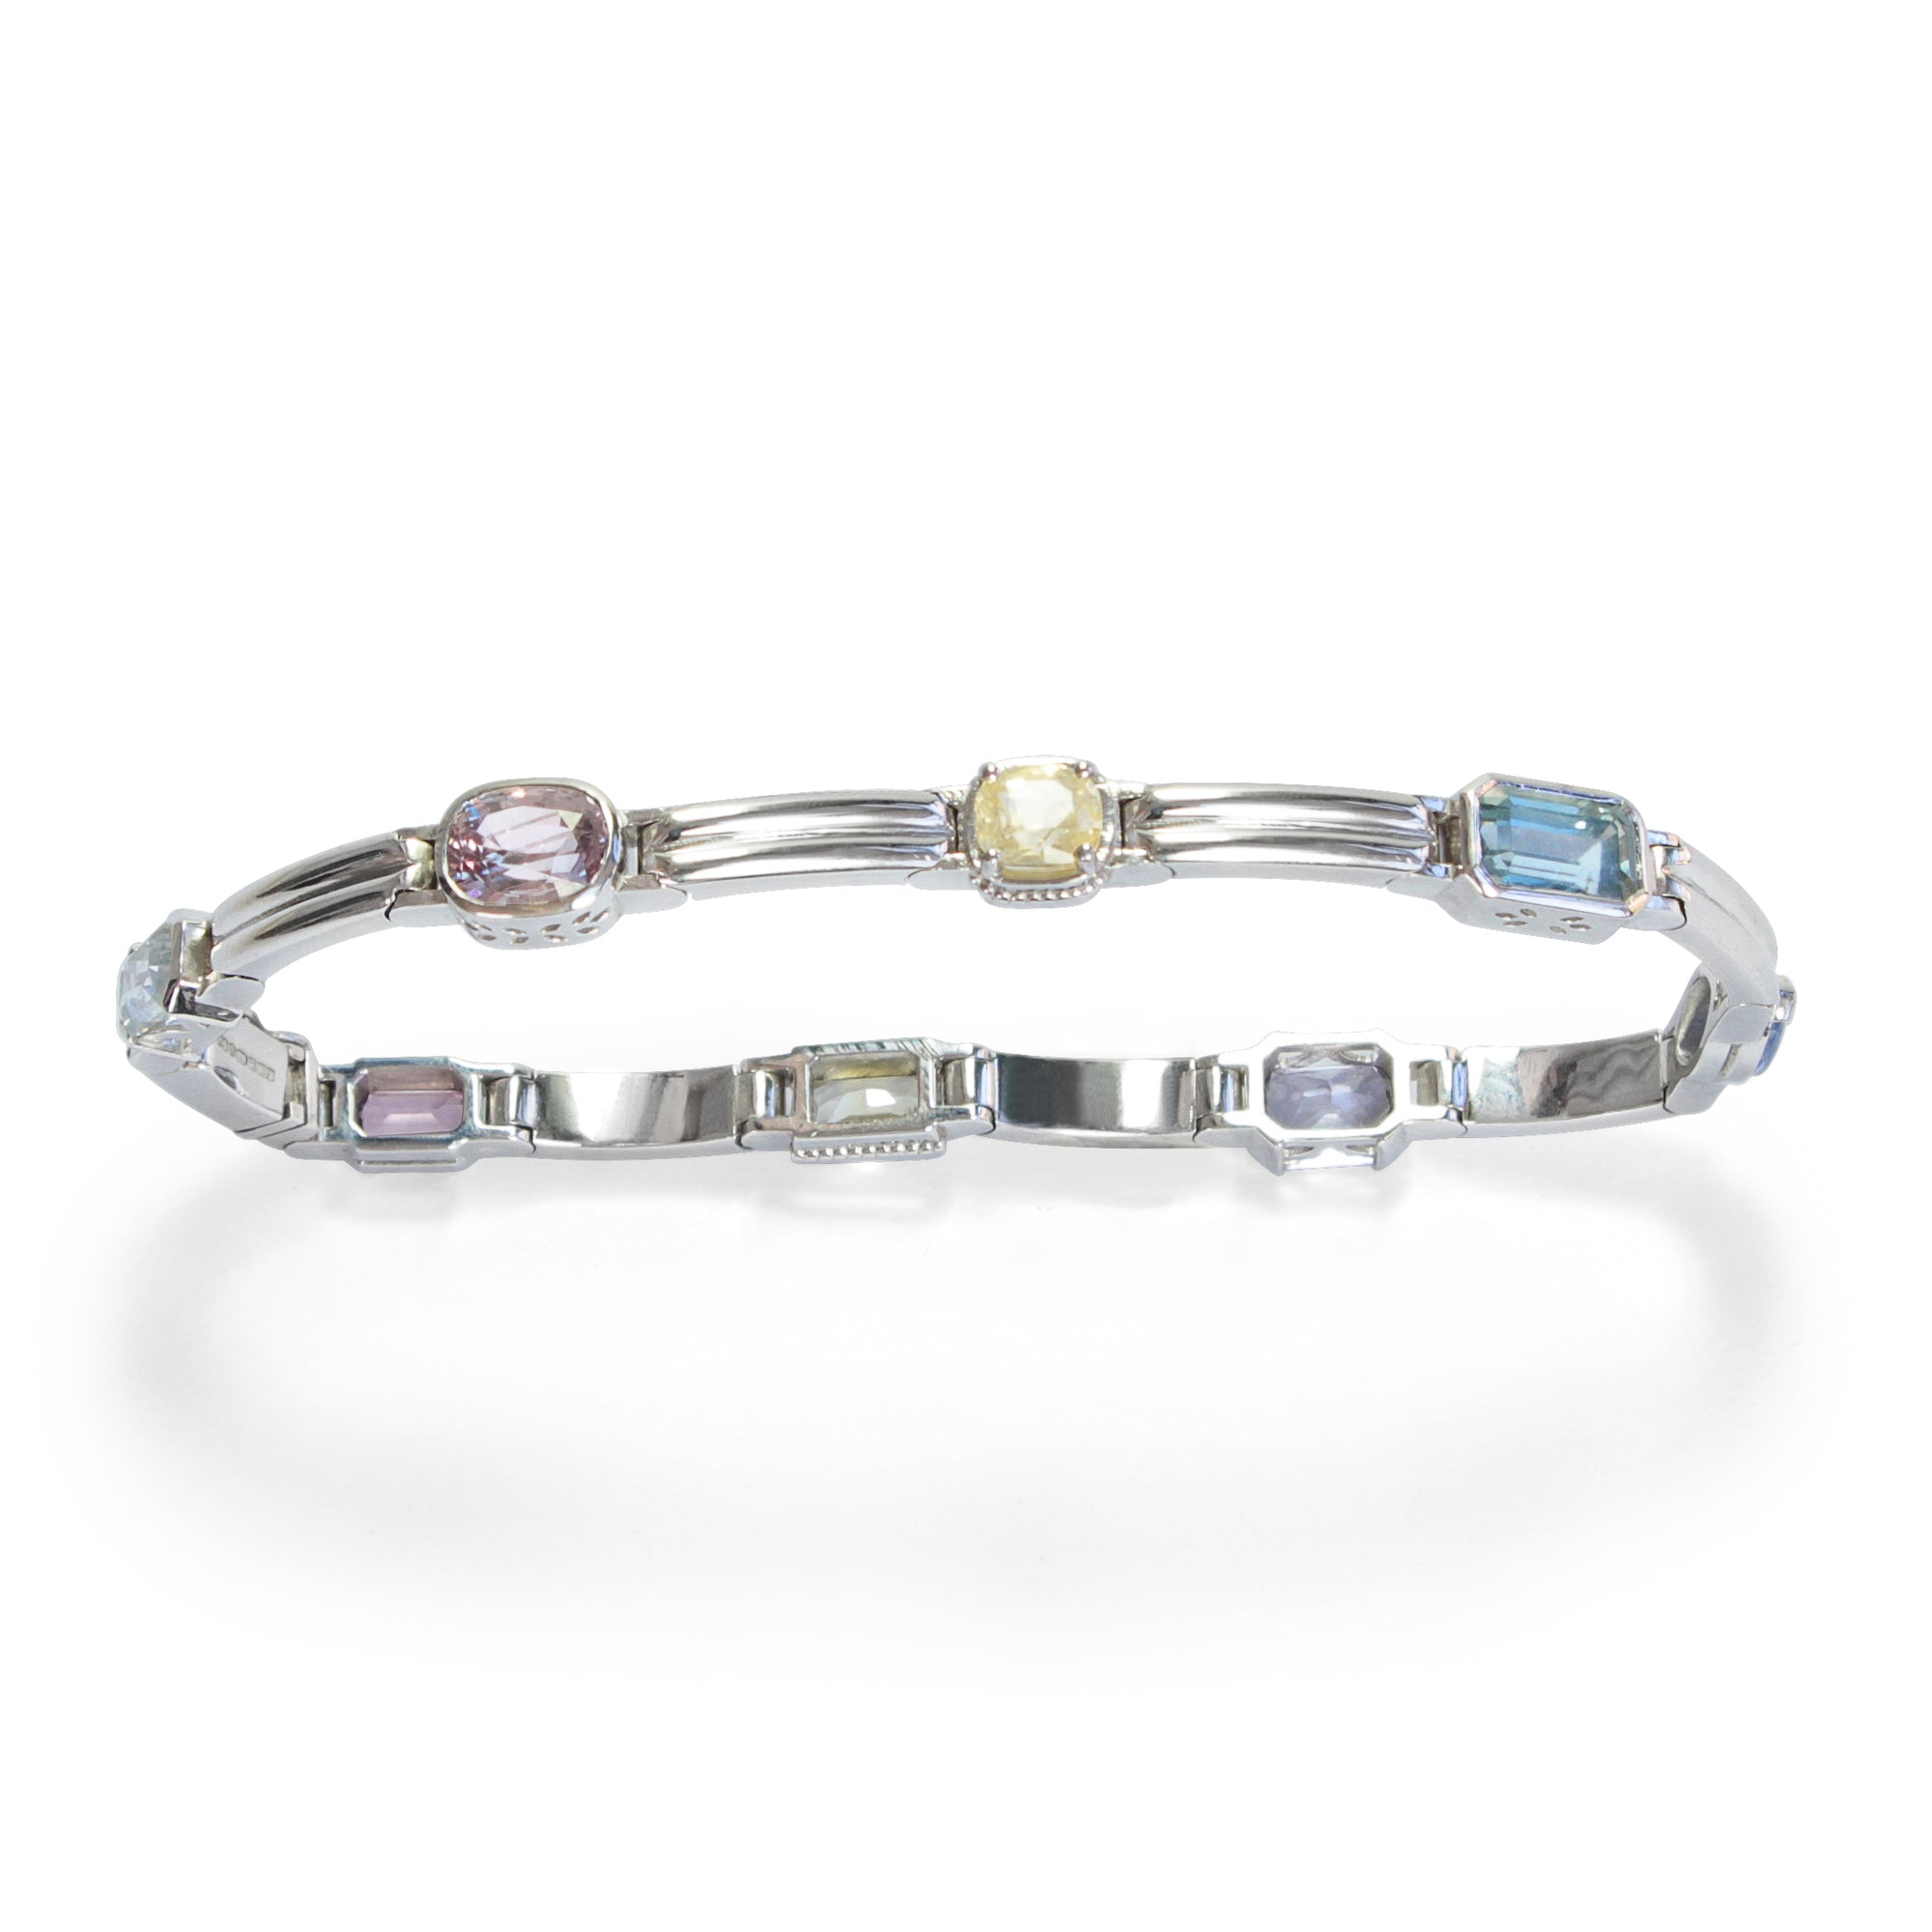 Bespoke Fairtrade Gold Articulated Bracelet with Fancy Sapphires